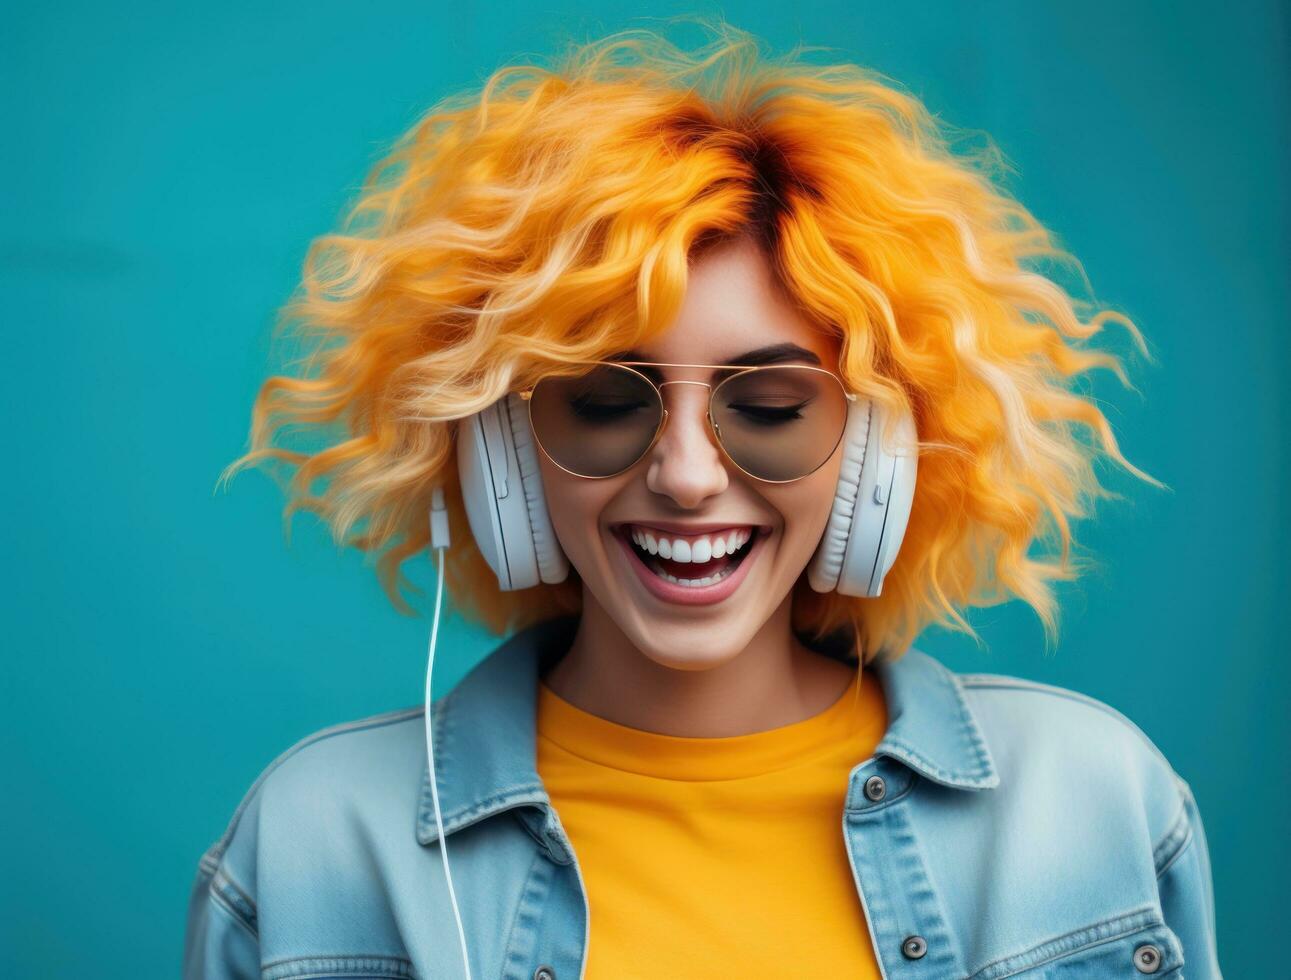 a young lady posing with headphones in blue background photo